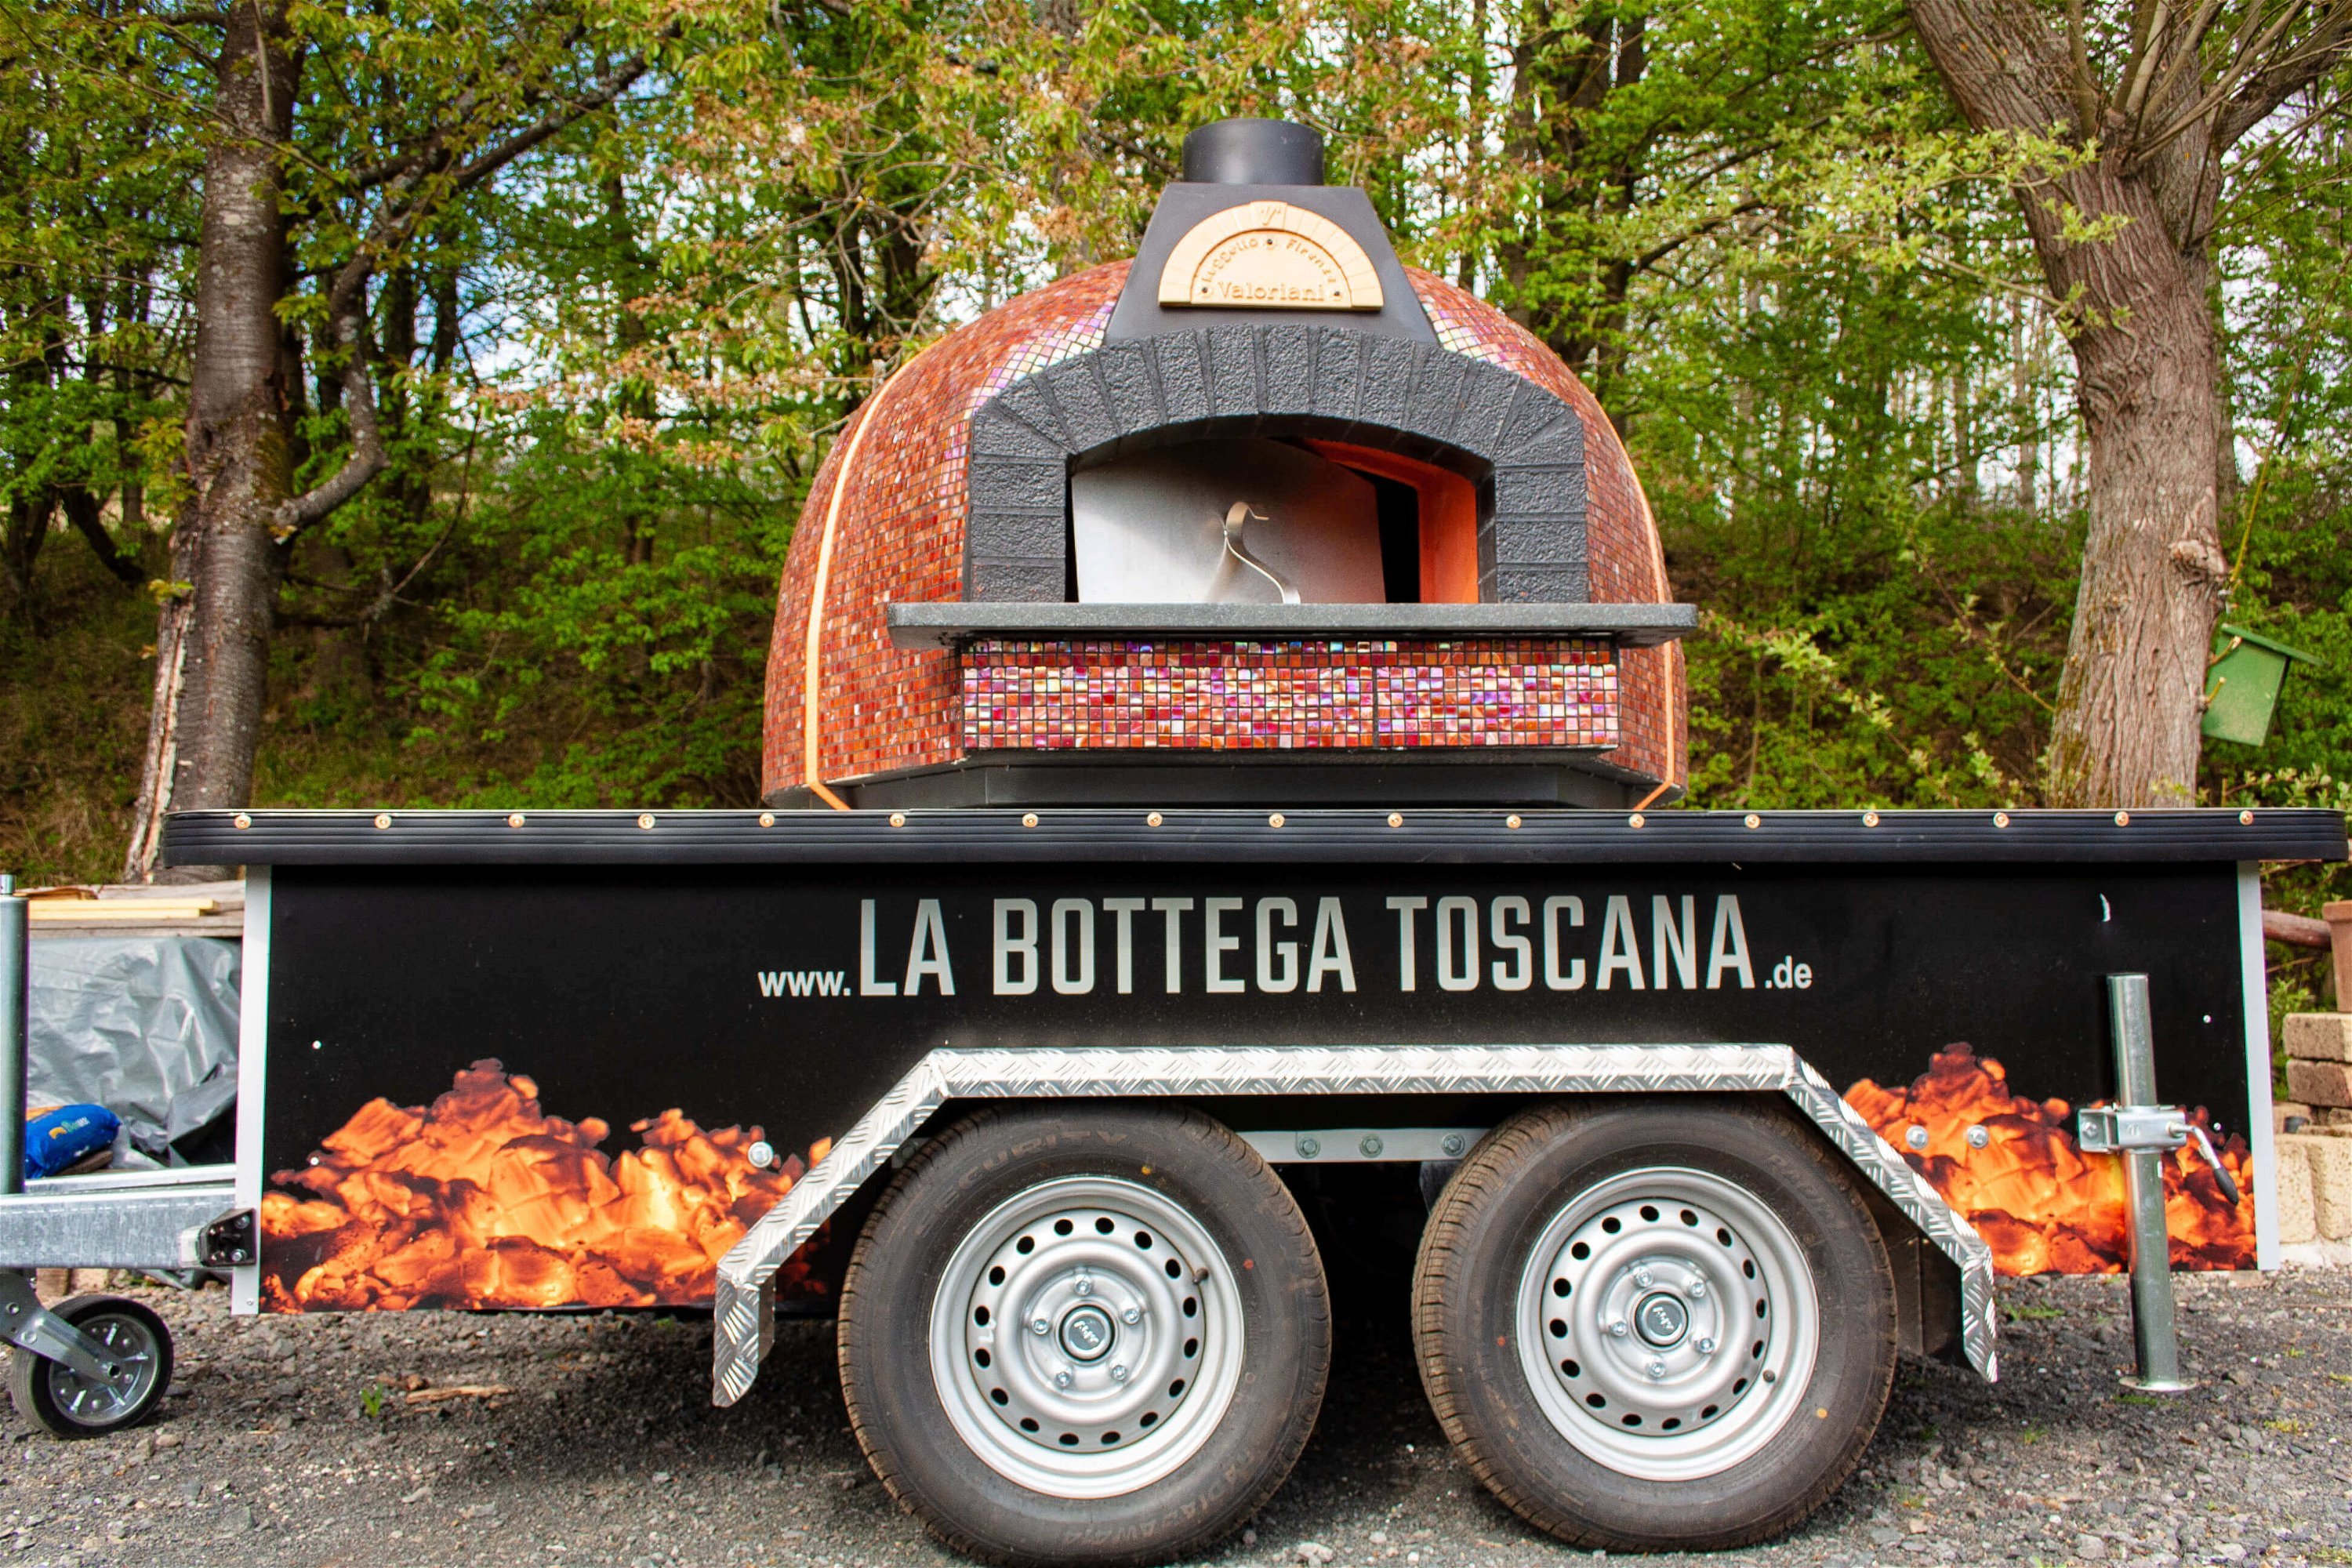 Valoriani pizza oven trailer: Igloo or hobby with mosaic on trailer for gastro, catering, street food